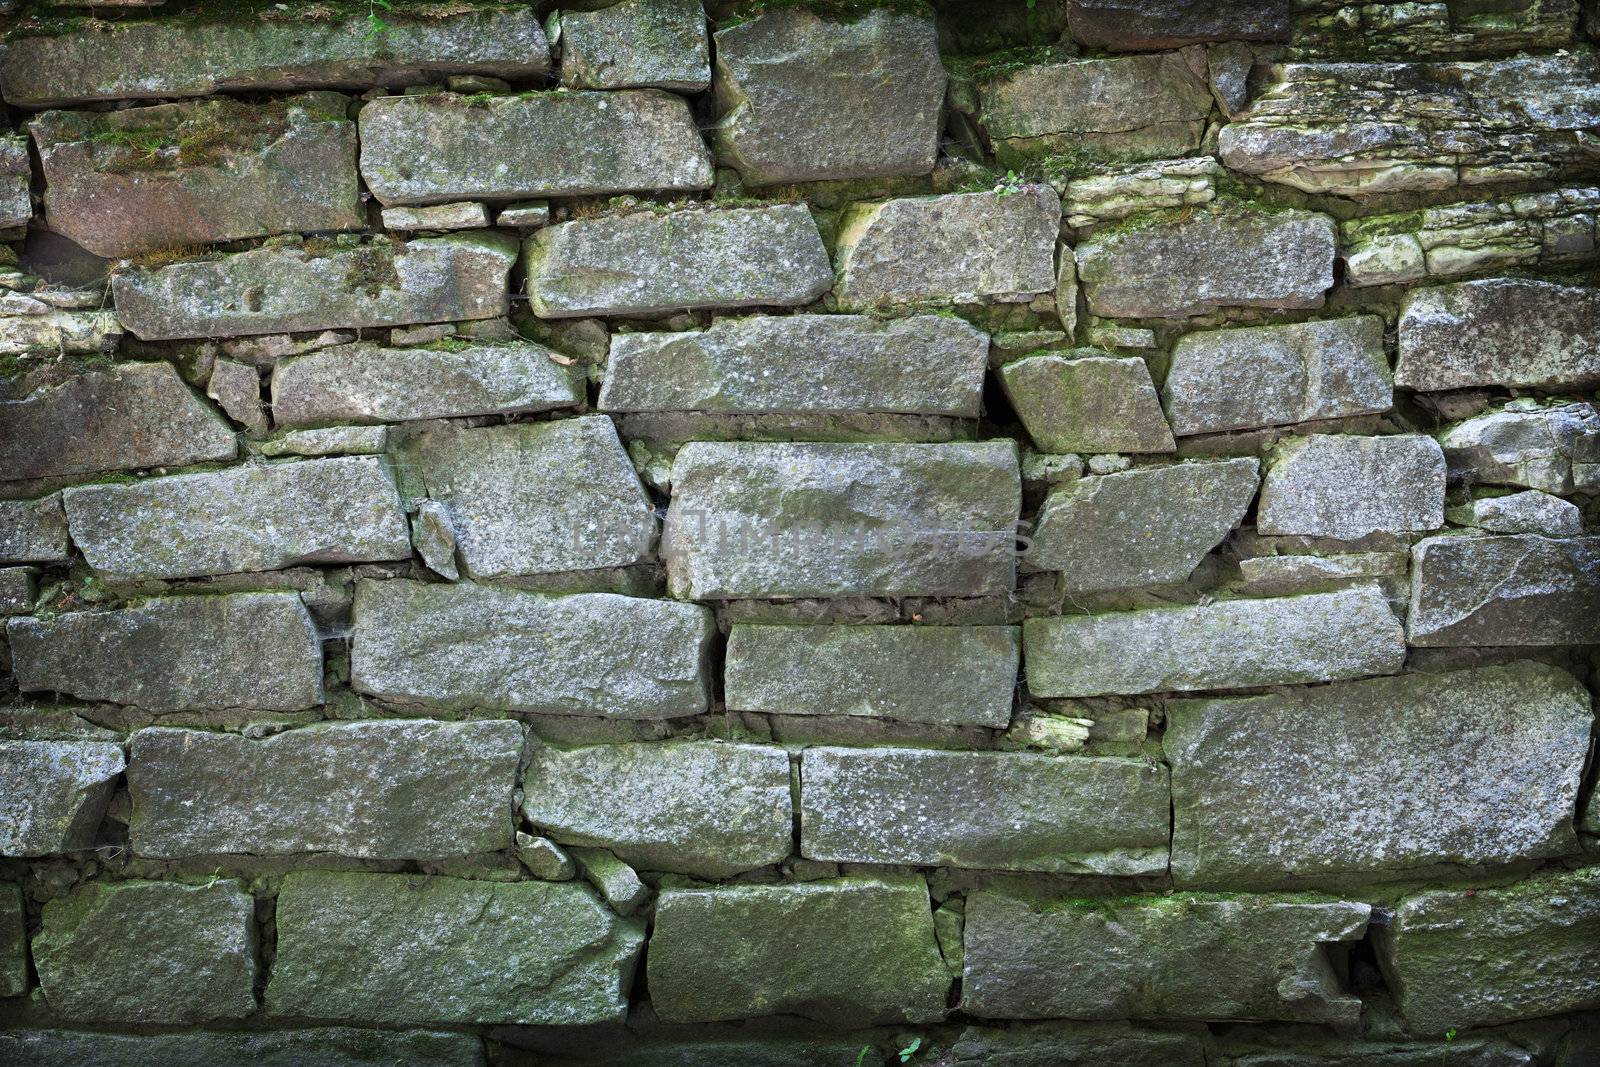 Masonry, green with moisture - the background